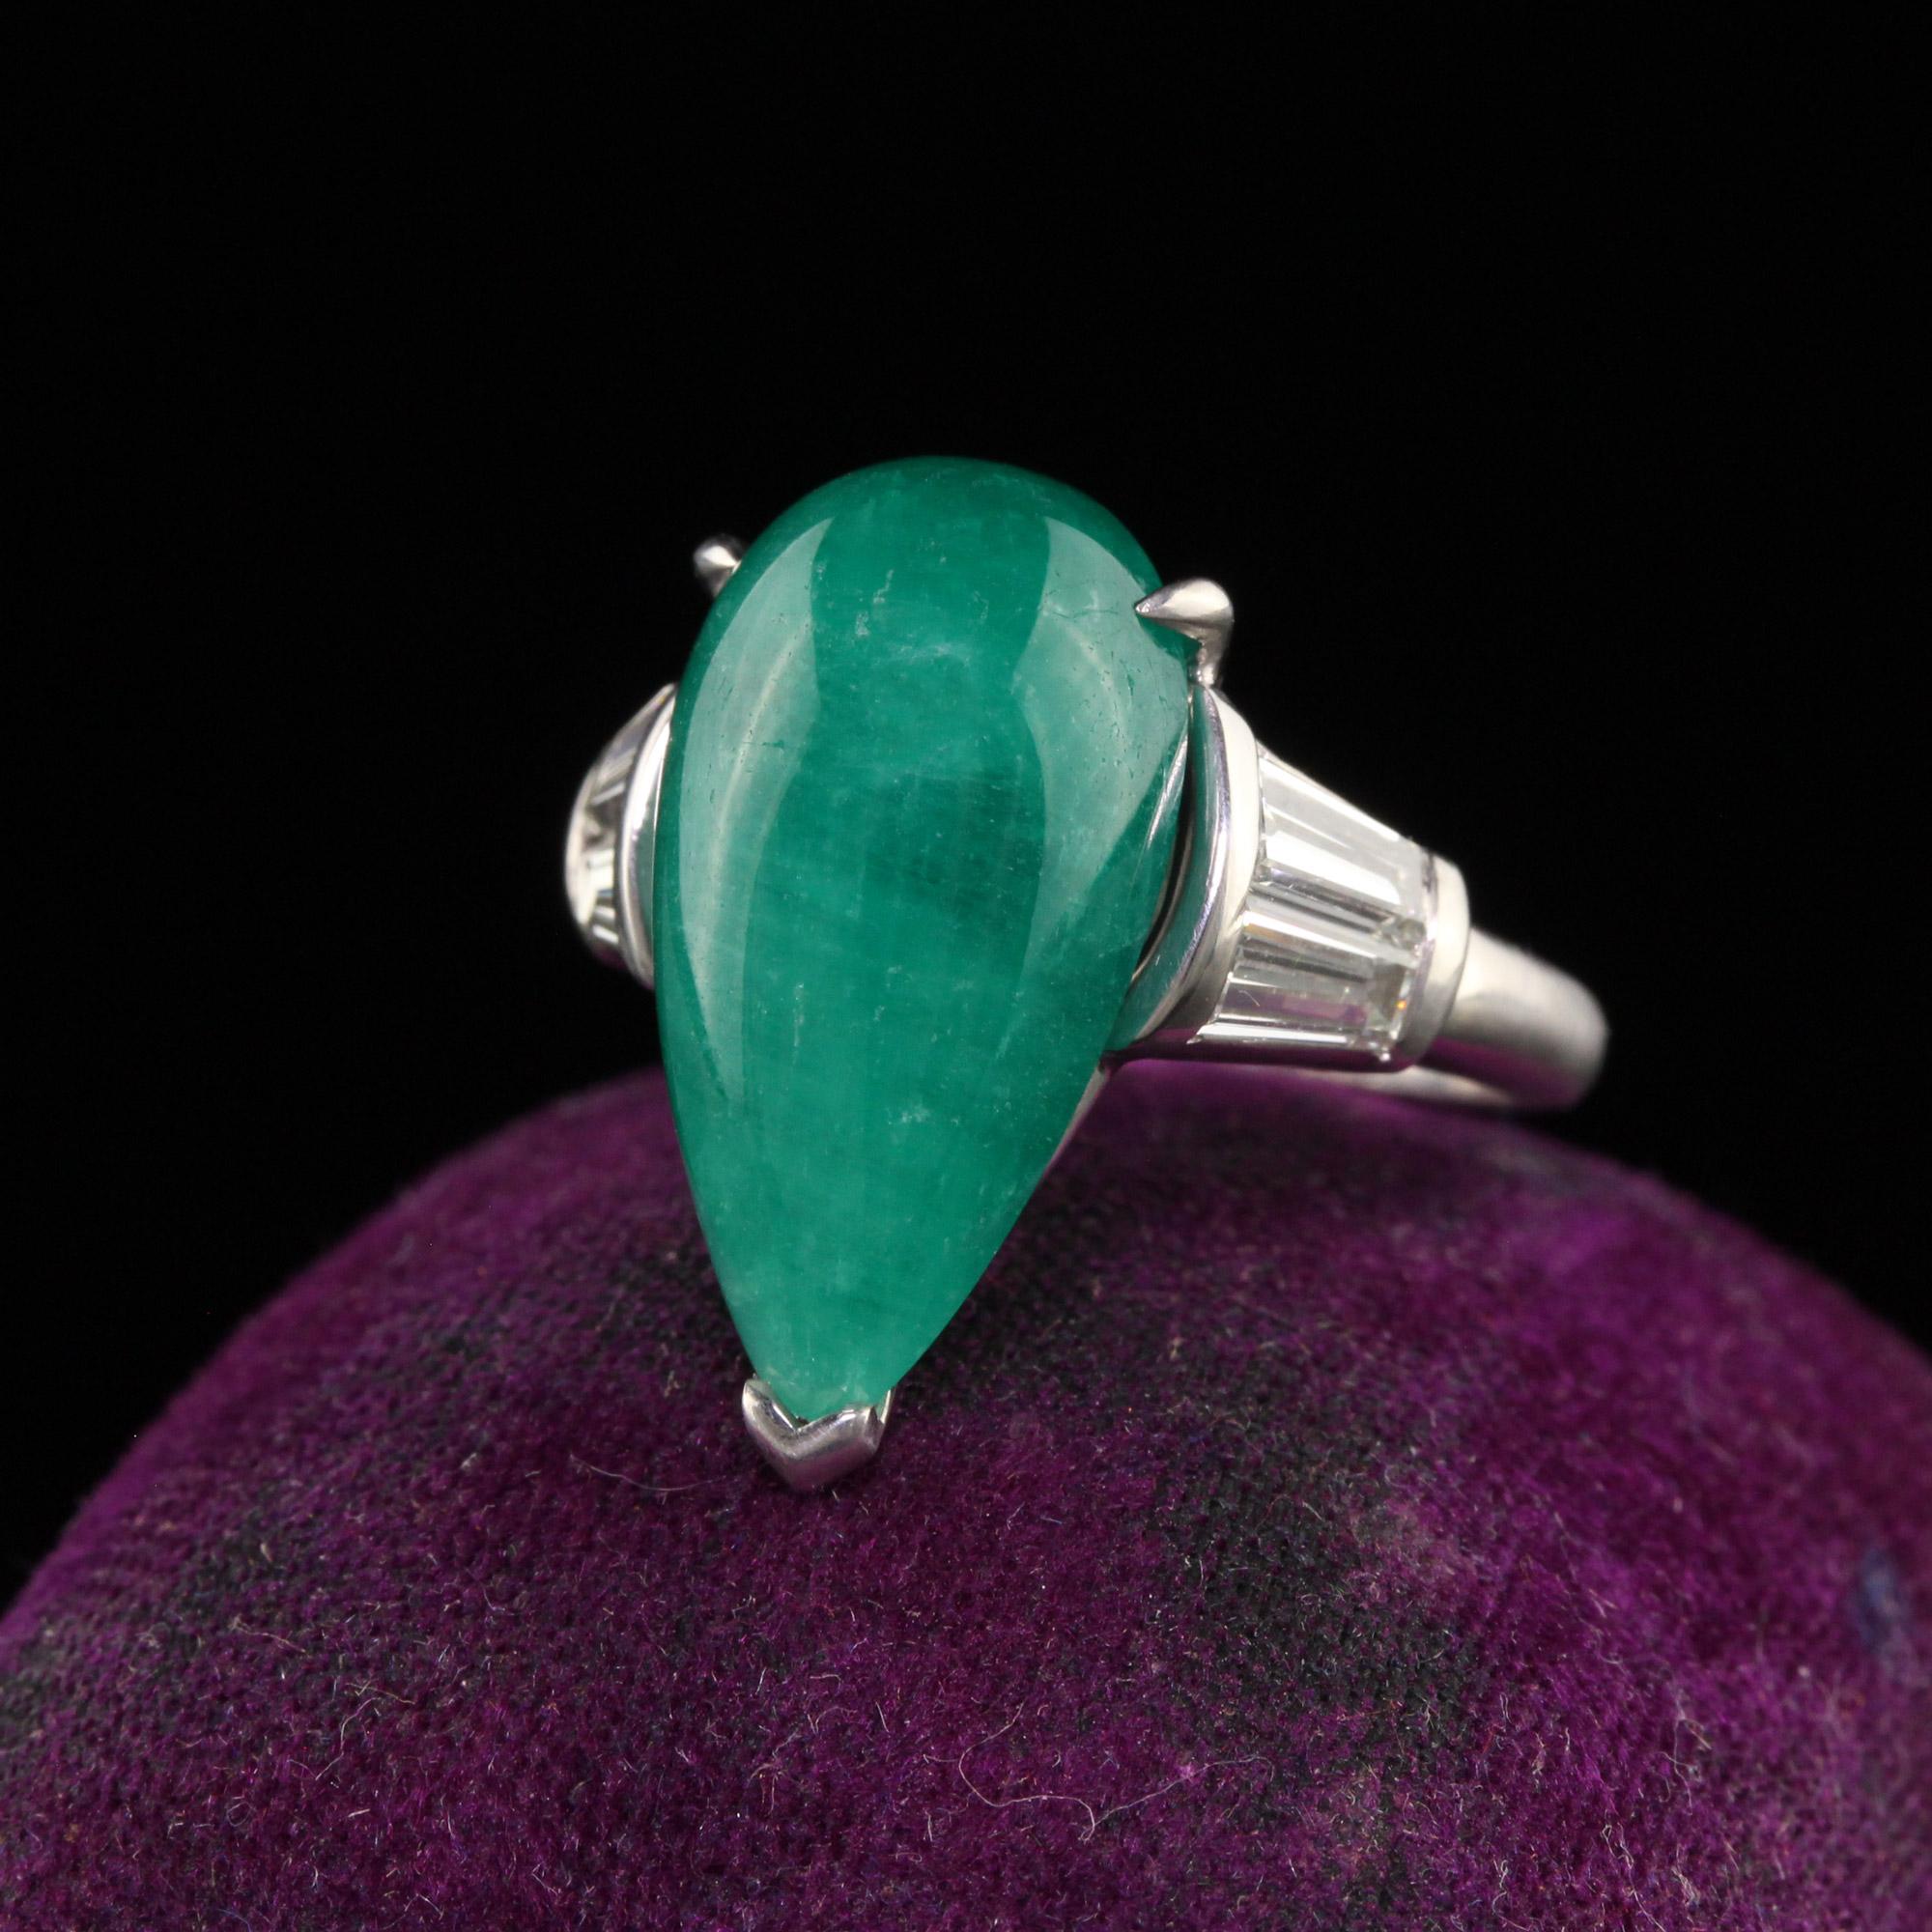 Beautiful Vintage Retro Platinum Colombian Emerald Pear Cabochon Diamond Ring. This beautiful ring is crafted in platinum. The center holds a natural Colombian emerald with large tapered baguettes on each side. The ring is in great condition and